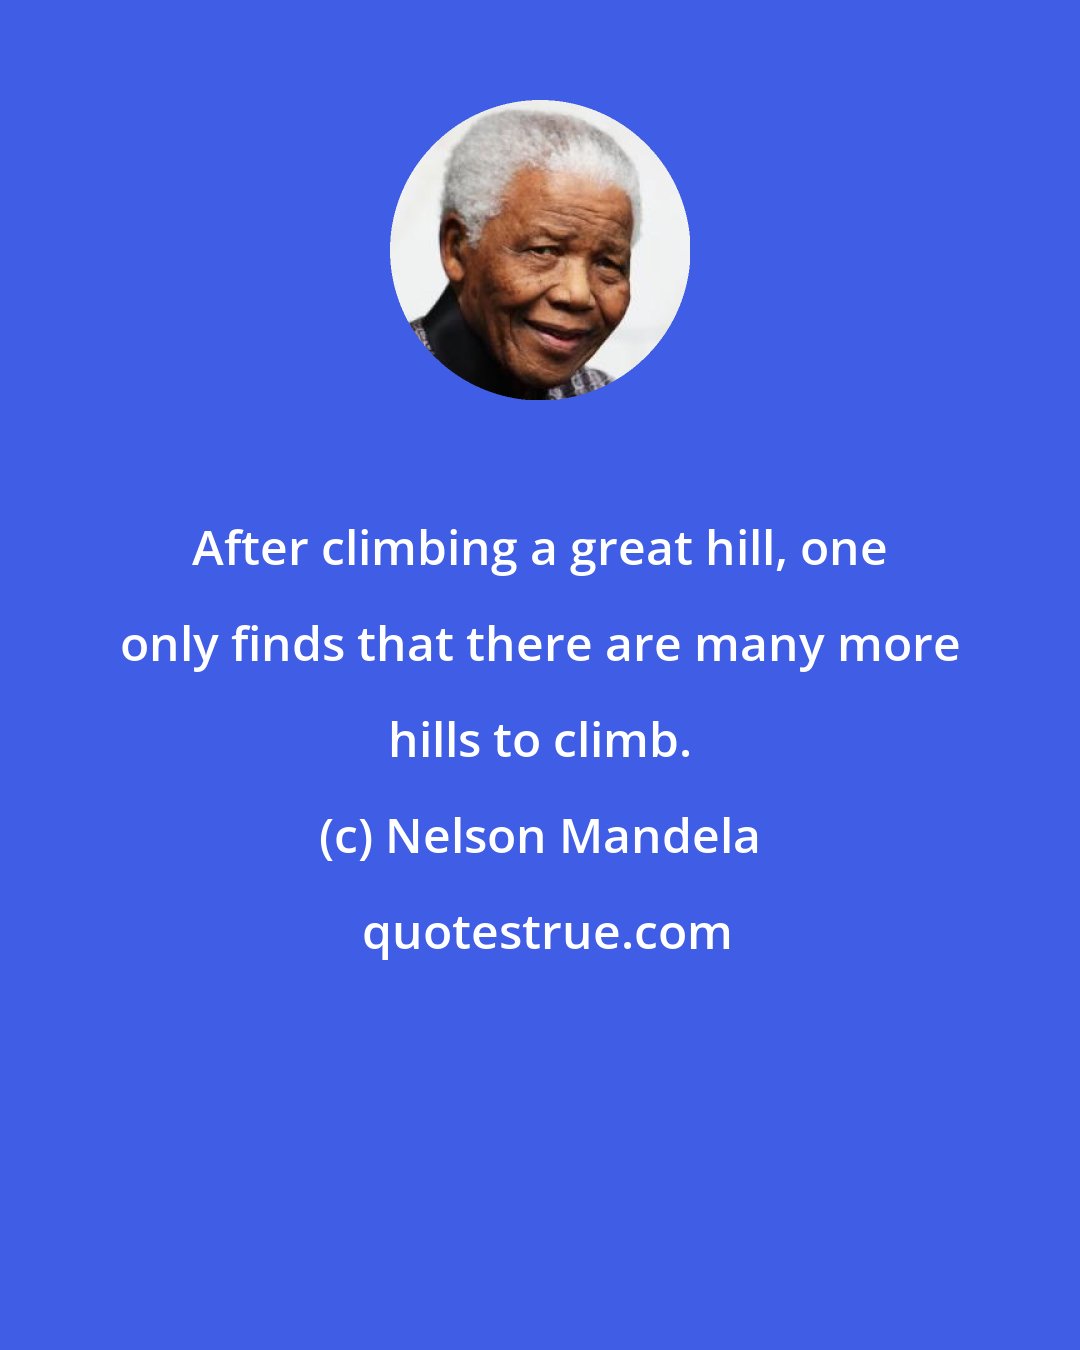 Nelson Mandela: After climbing a great hill, one only finds that there are many more hills to climb.